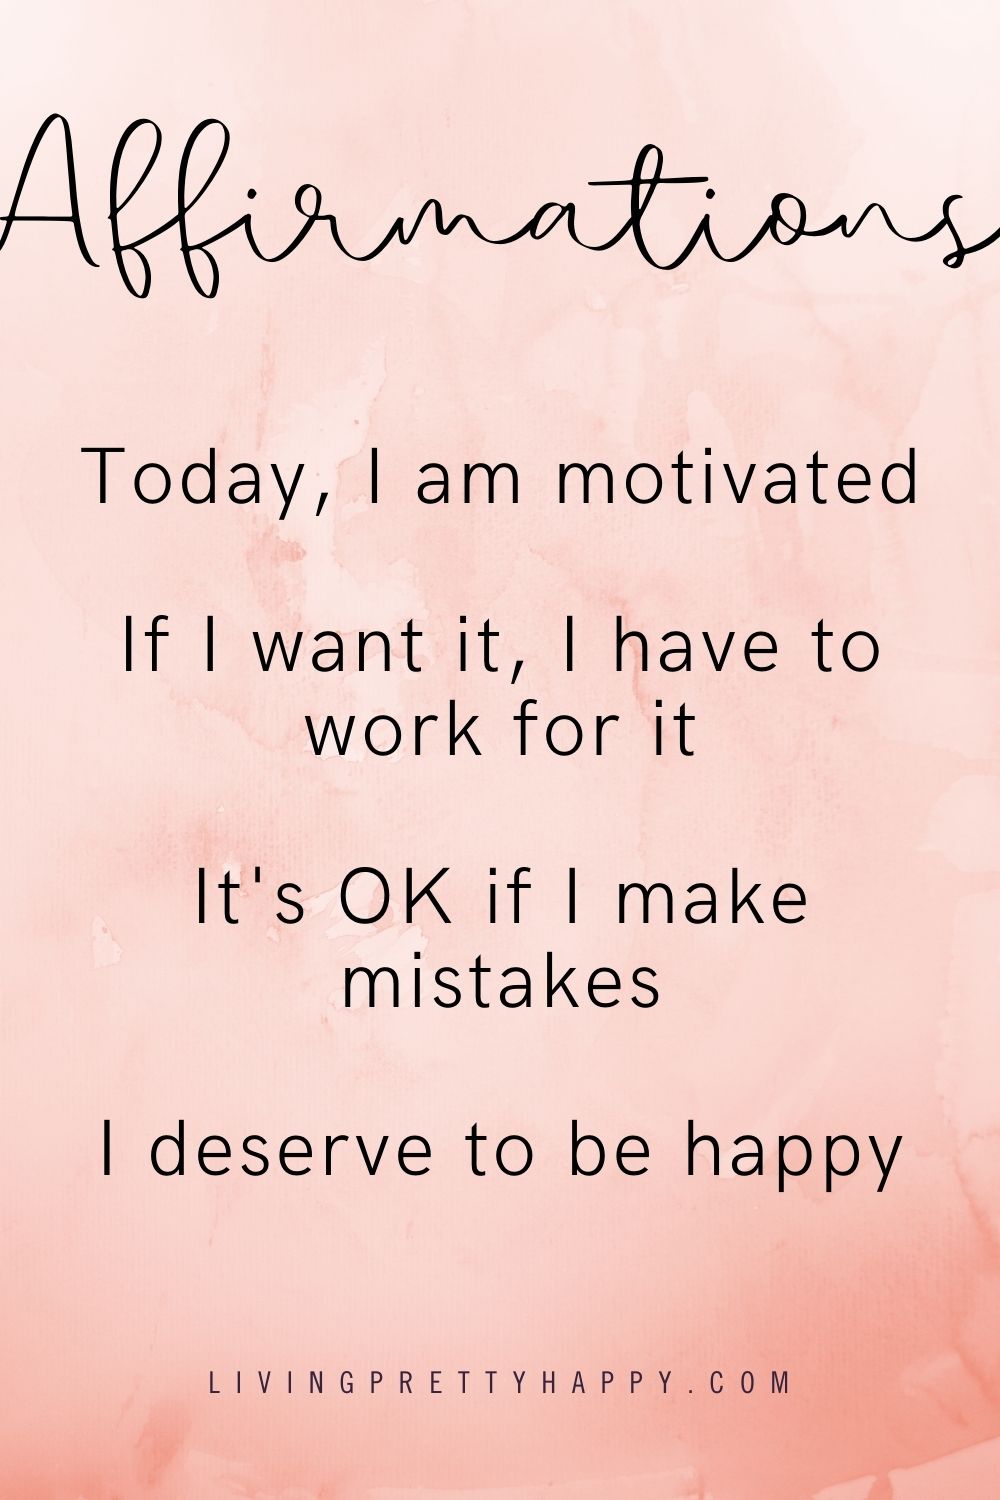 Self-Worth Affirmations to motivate and encourage